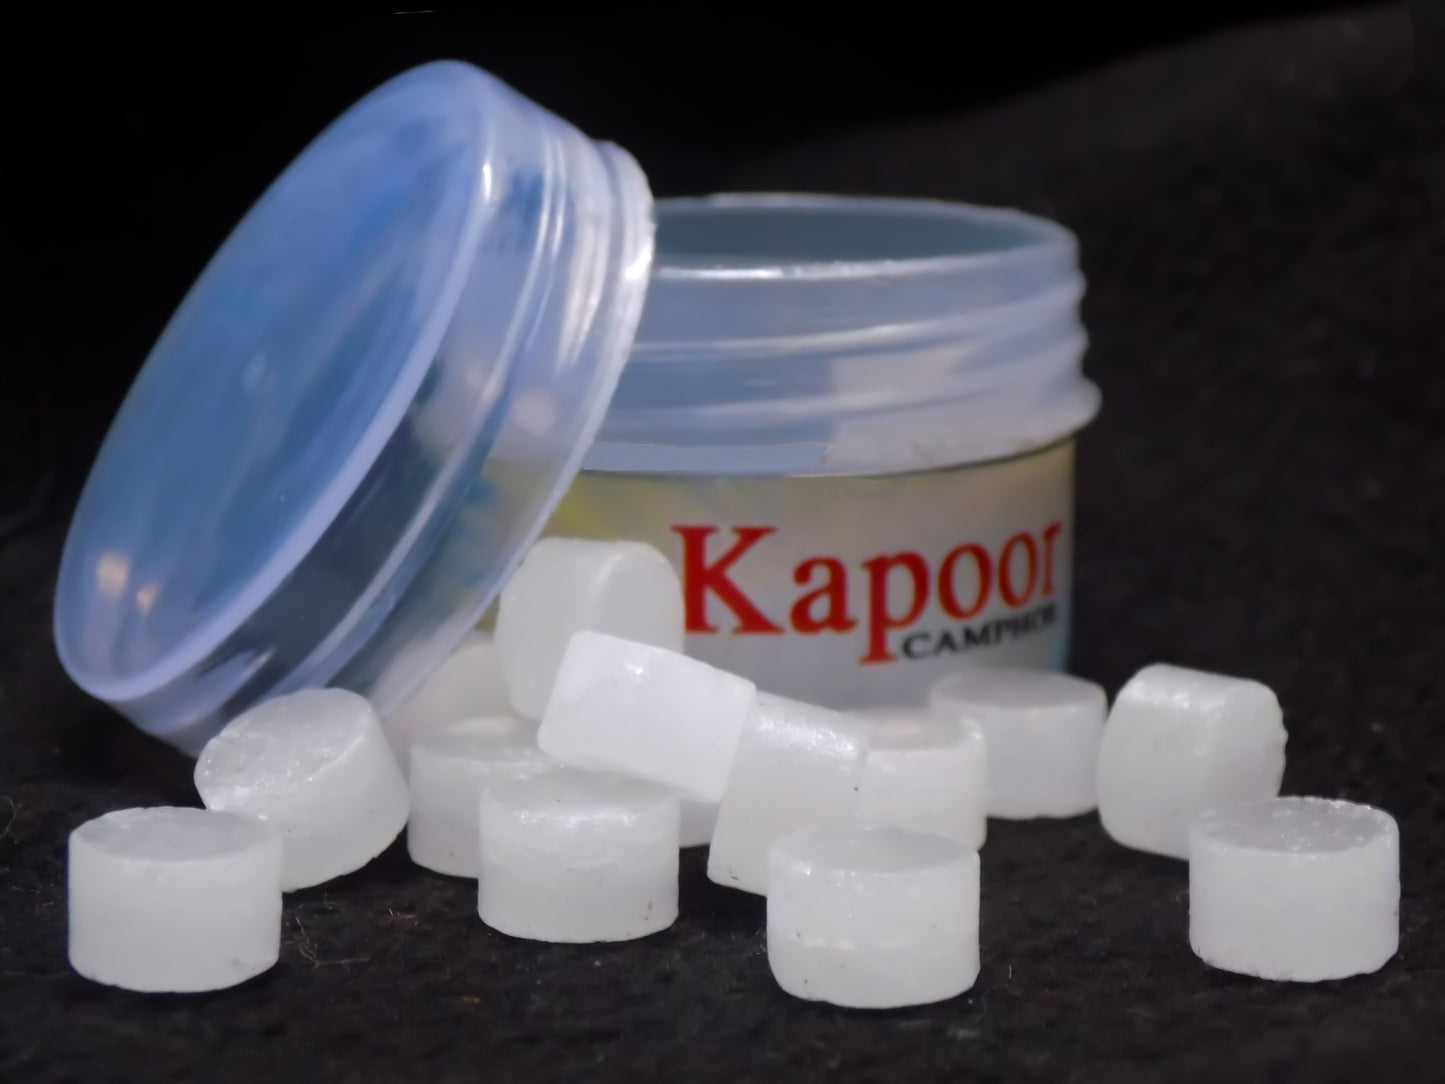 Pure Kapoor Tablets for Diffuser Puja Meditation (10gm)